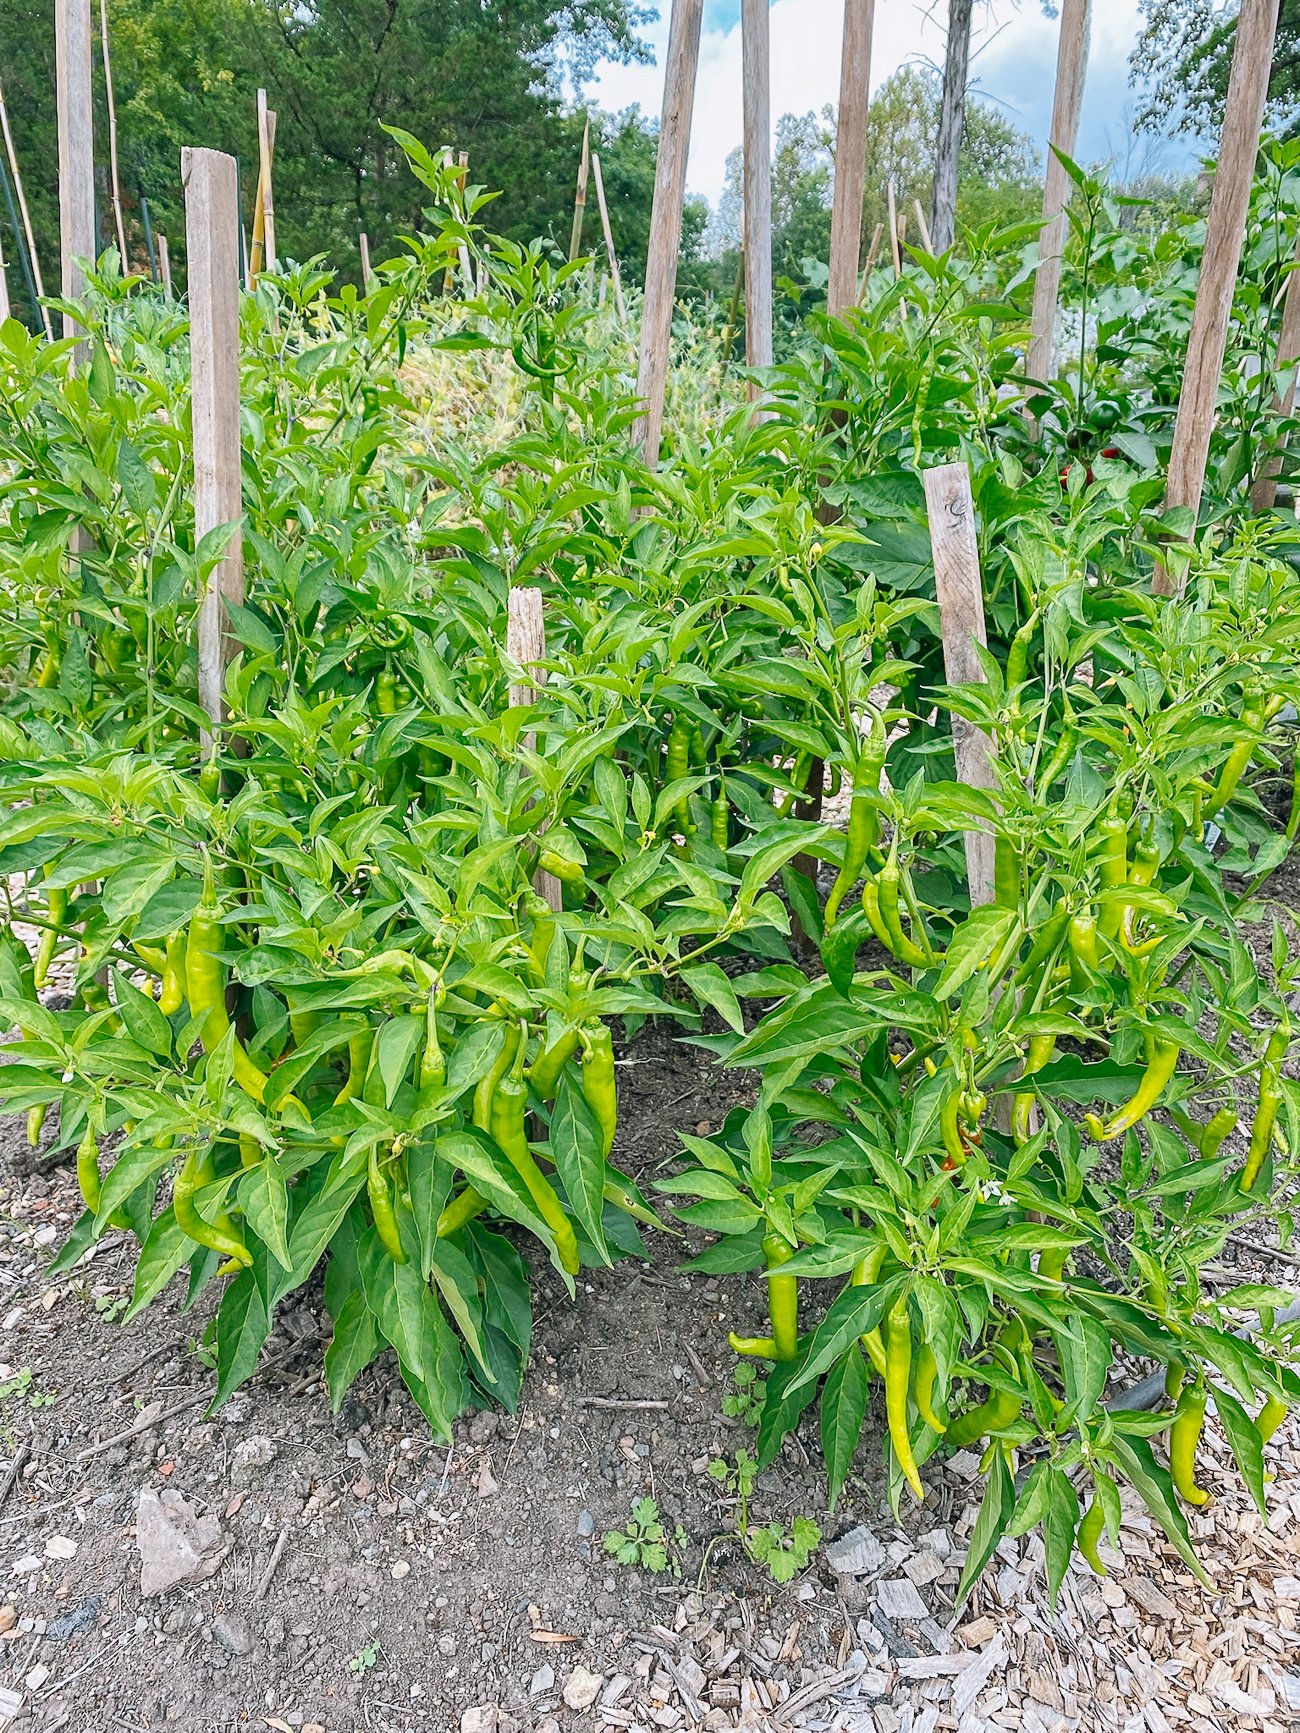 pepper plants with wooden stakes for support